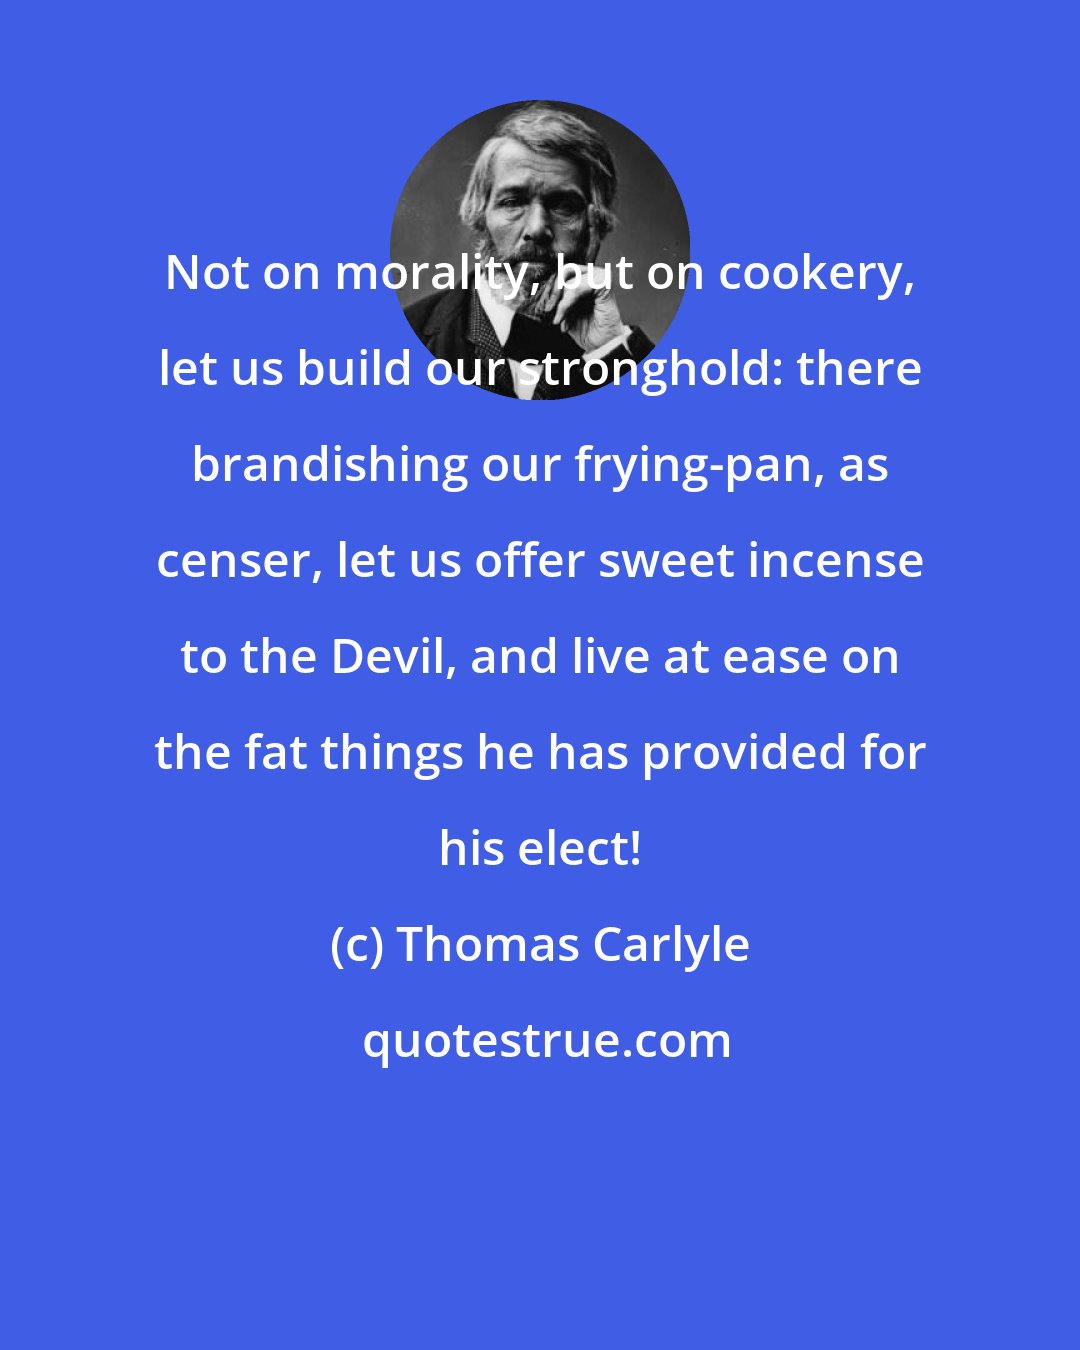 Thomas Carlyle: Not on morality, but on cookery, let us build our stronghold: there brandishing our frying-pan, as censer, let us offer sweet incense to the Devil, and live at ease on the fat things he has provided for his elect!